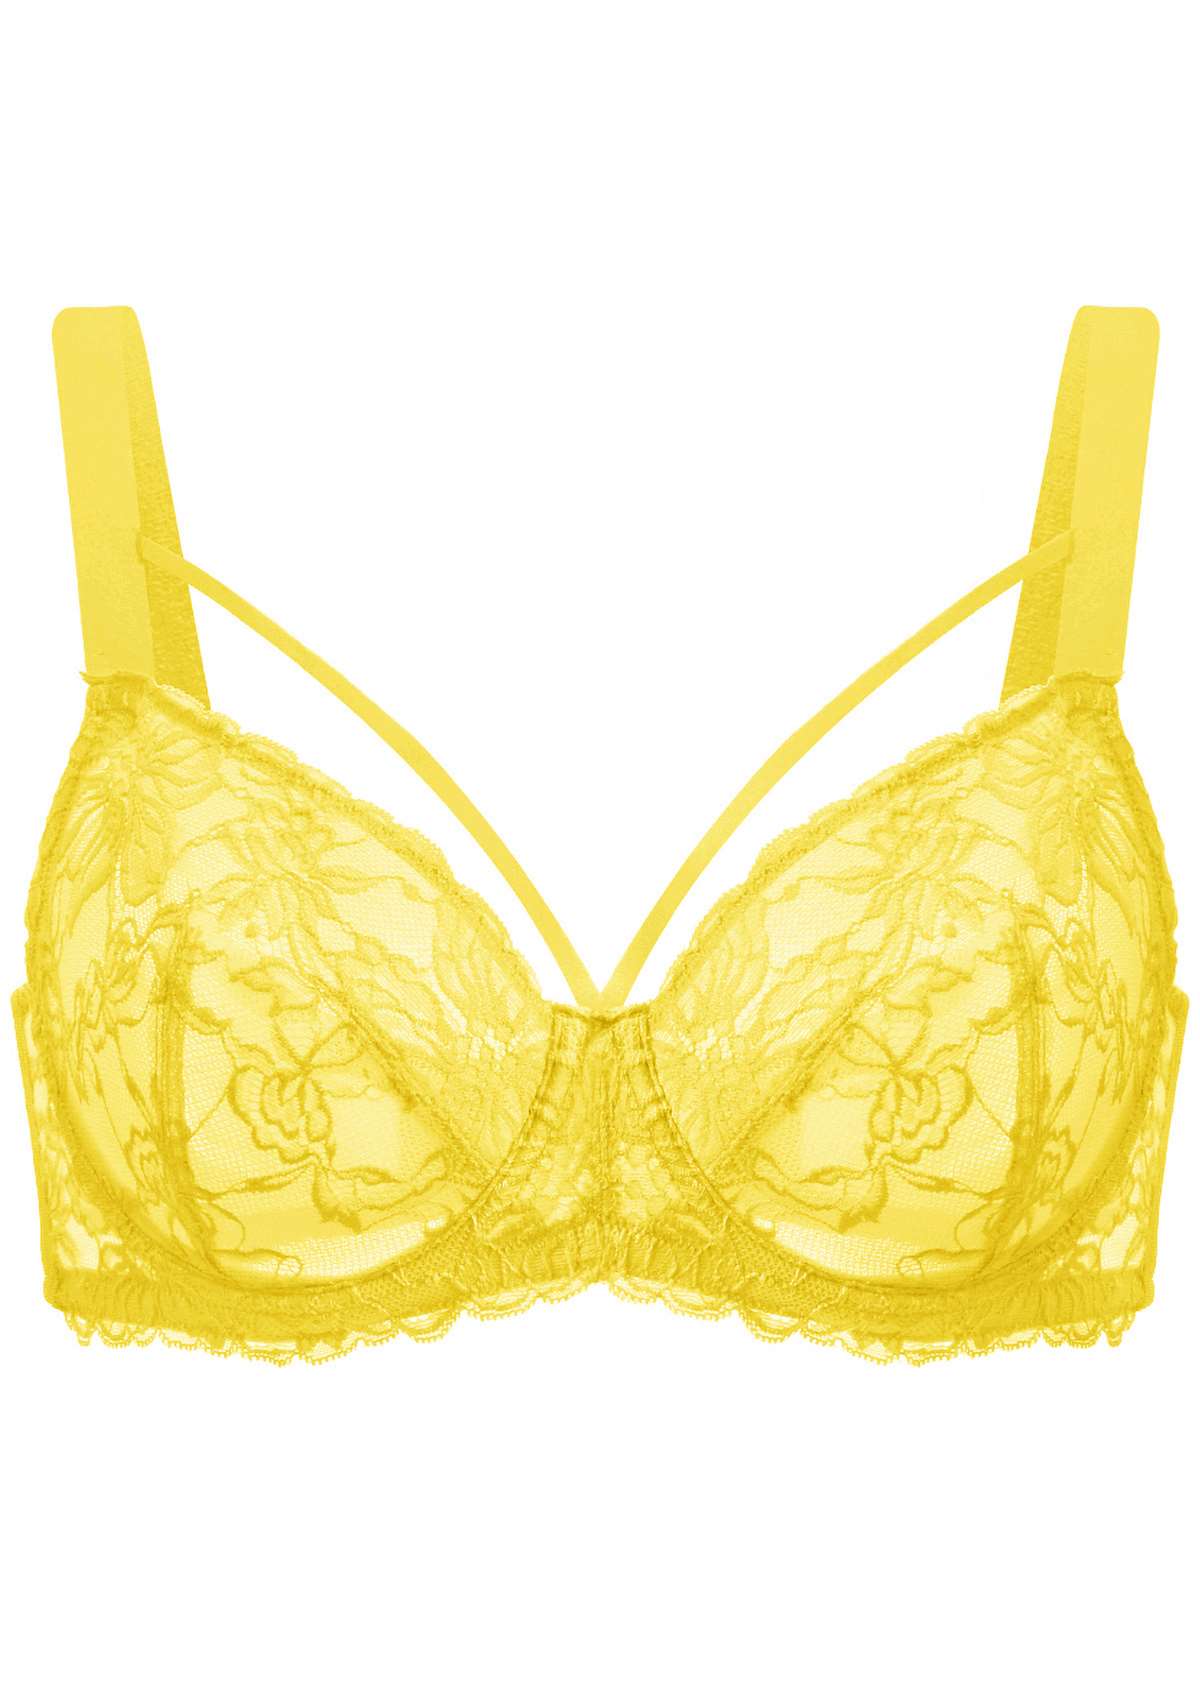 HSIA Unlined Lace Mesh Minimizer Bra For Large Breasts, Full Coverage - Bright Yellow / 42 / D